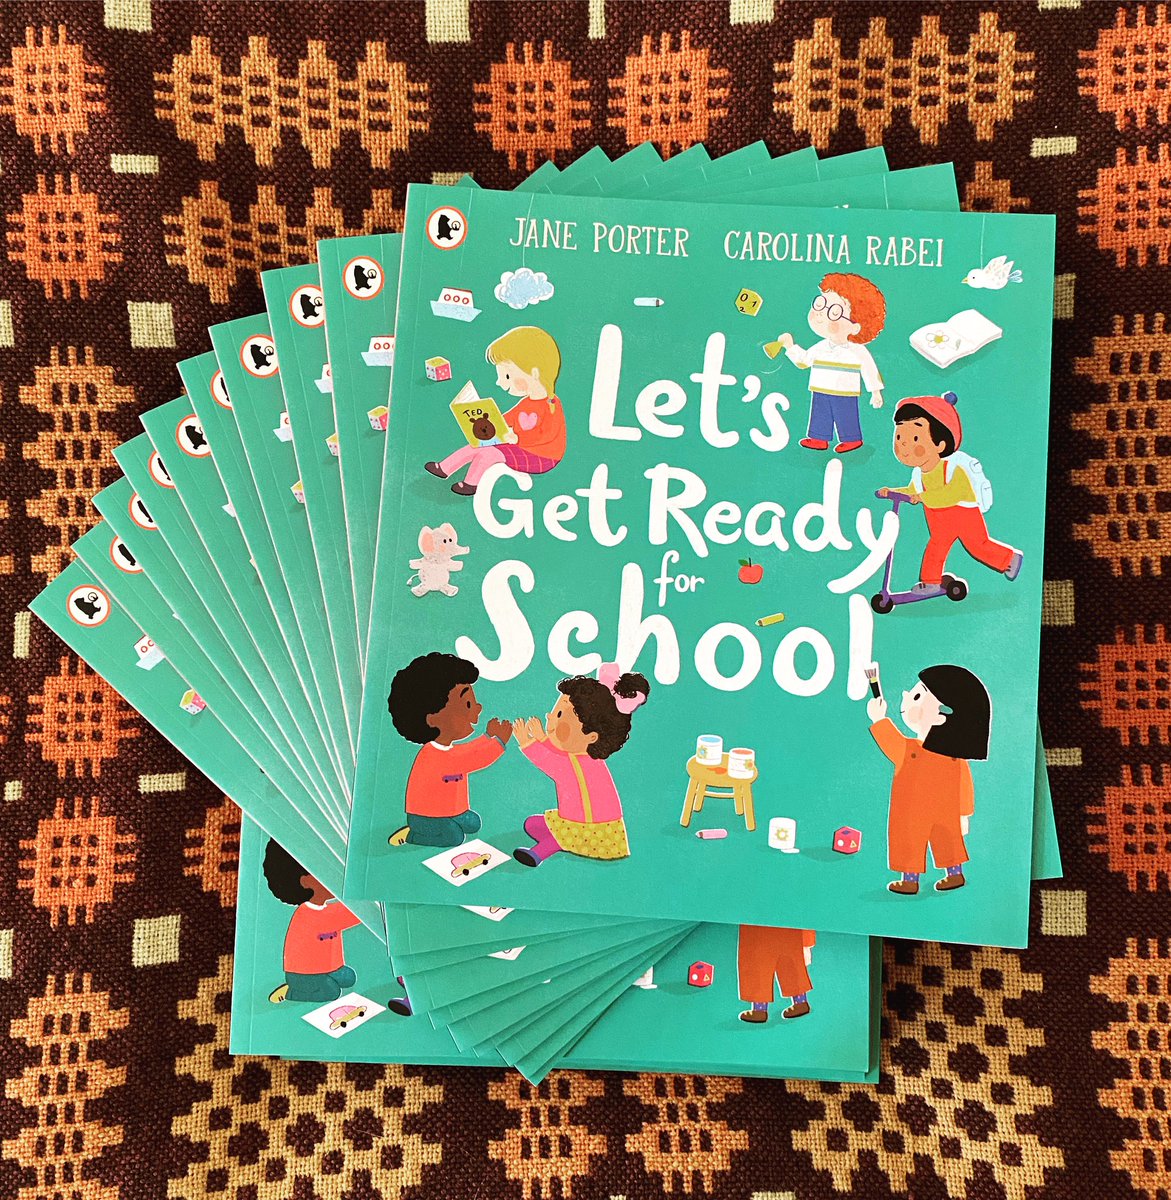 Here’s a nice stack of paperbacks from @BIGPictureBooks - #LetsGetReadyForSchool by me and @CarolinaRabei is out in paperback this Thursday - perfect timing for all the 4-year-olds in your life!